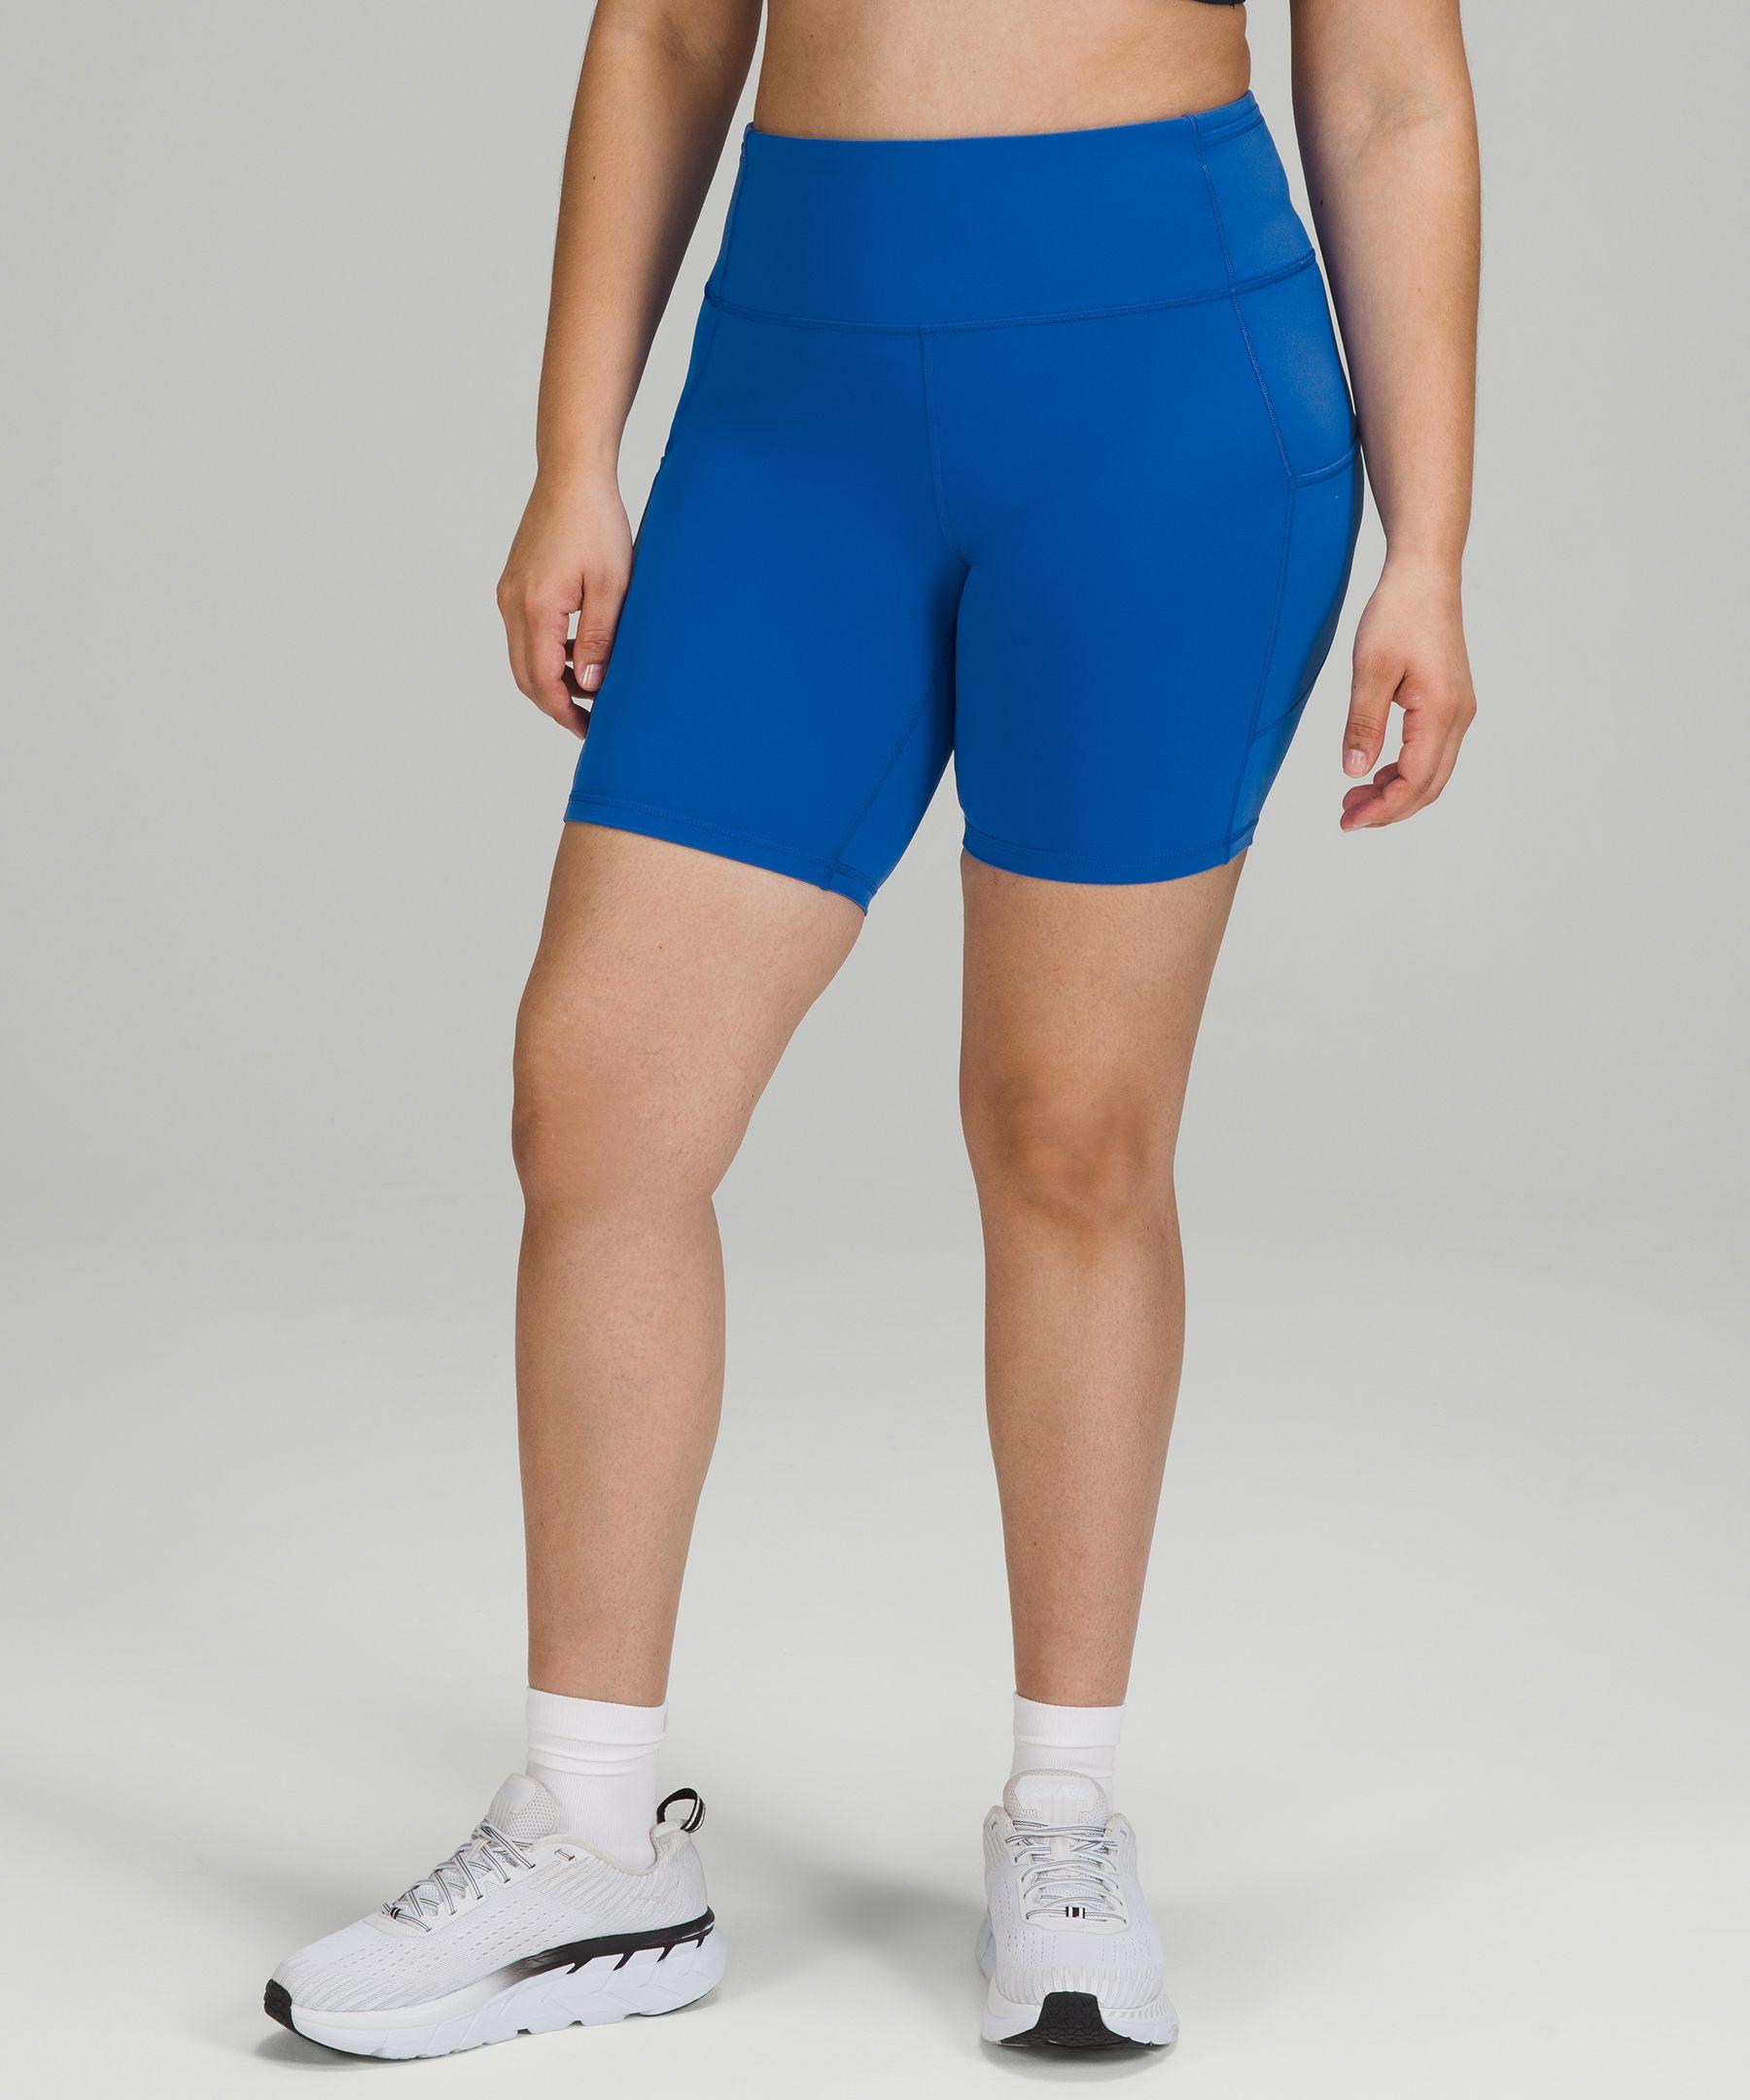 lululemon athletica Fast And Free High-rise Shorts 8 in Blue